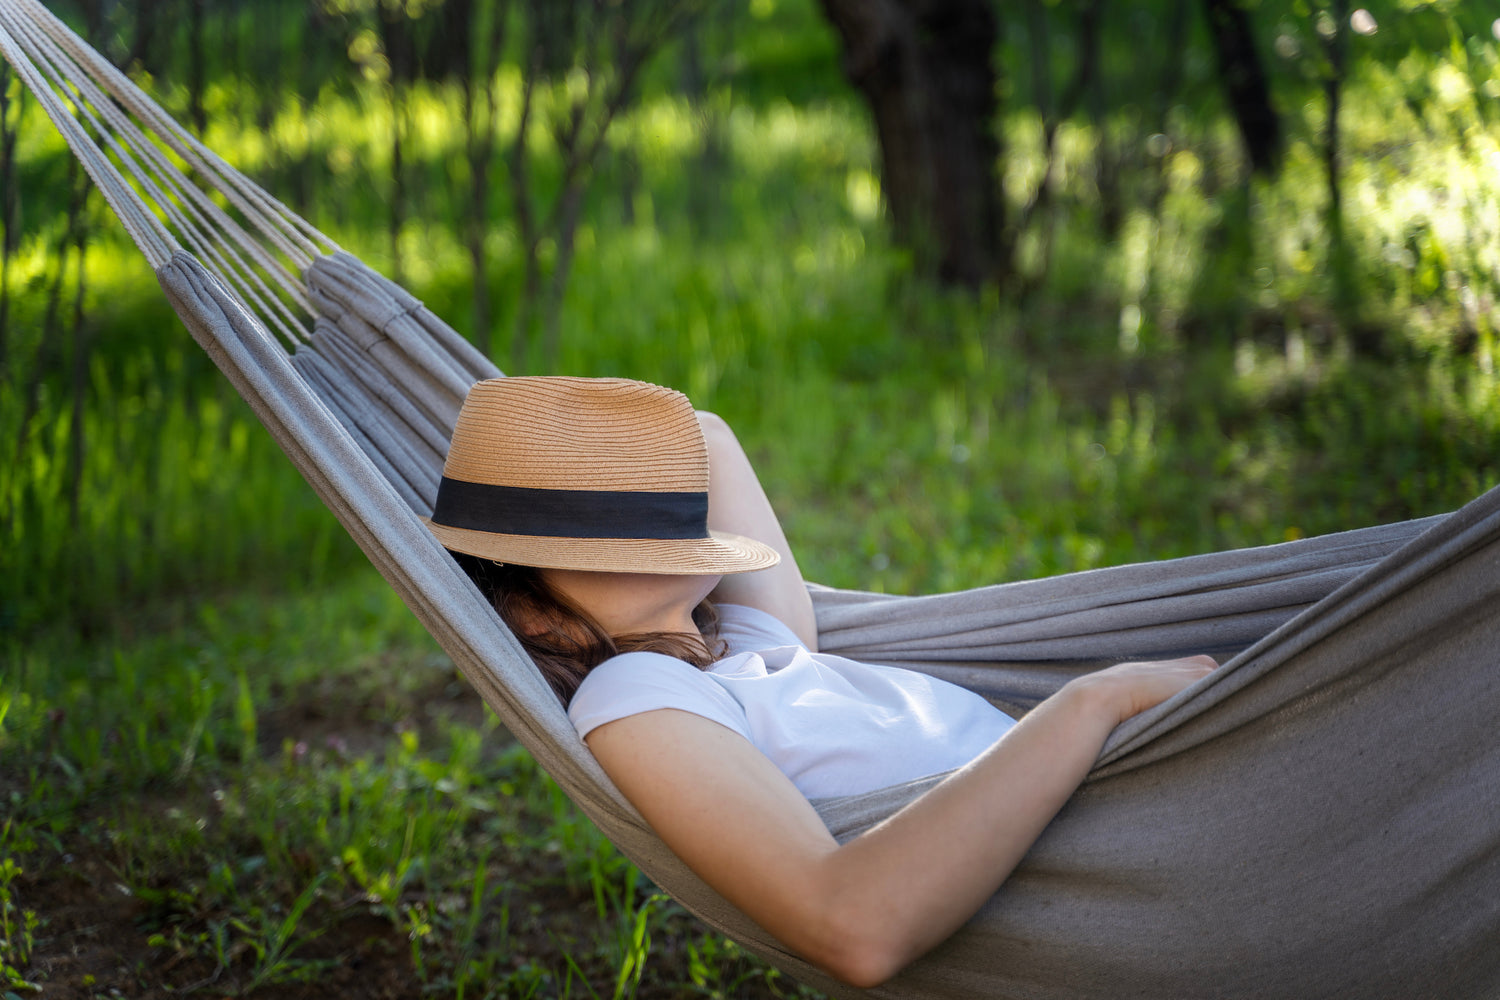 A woman asleep on a hammock with a hat over her face